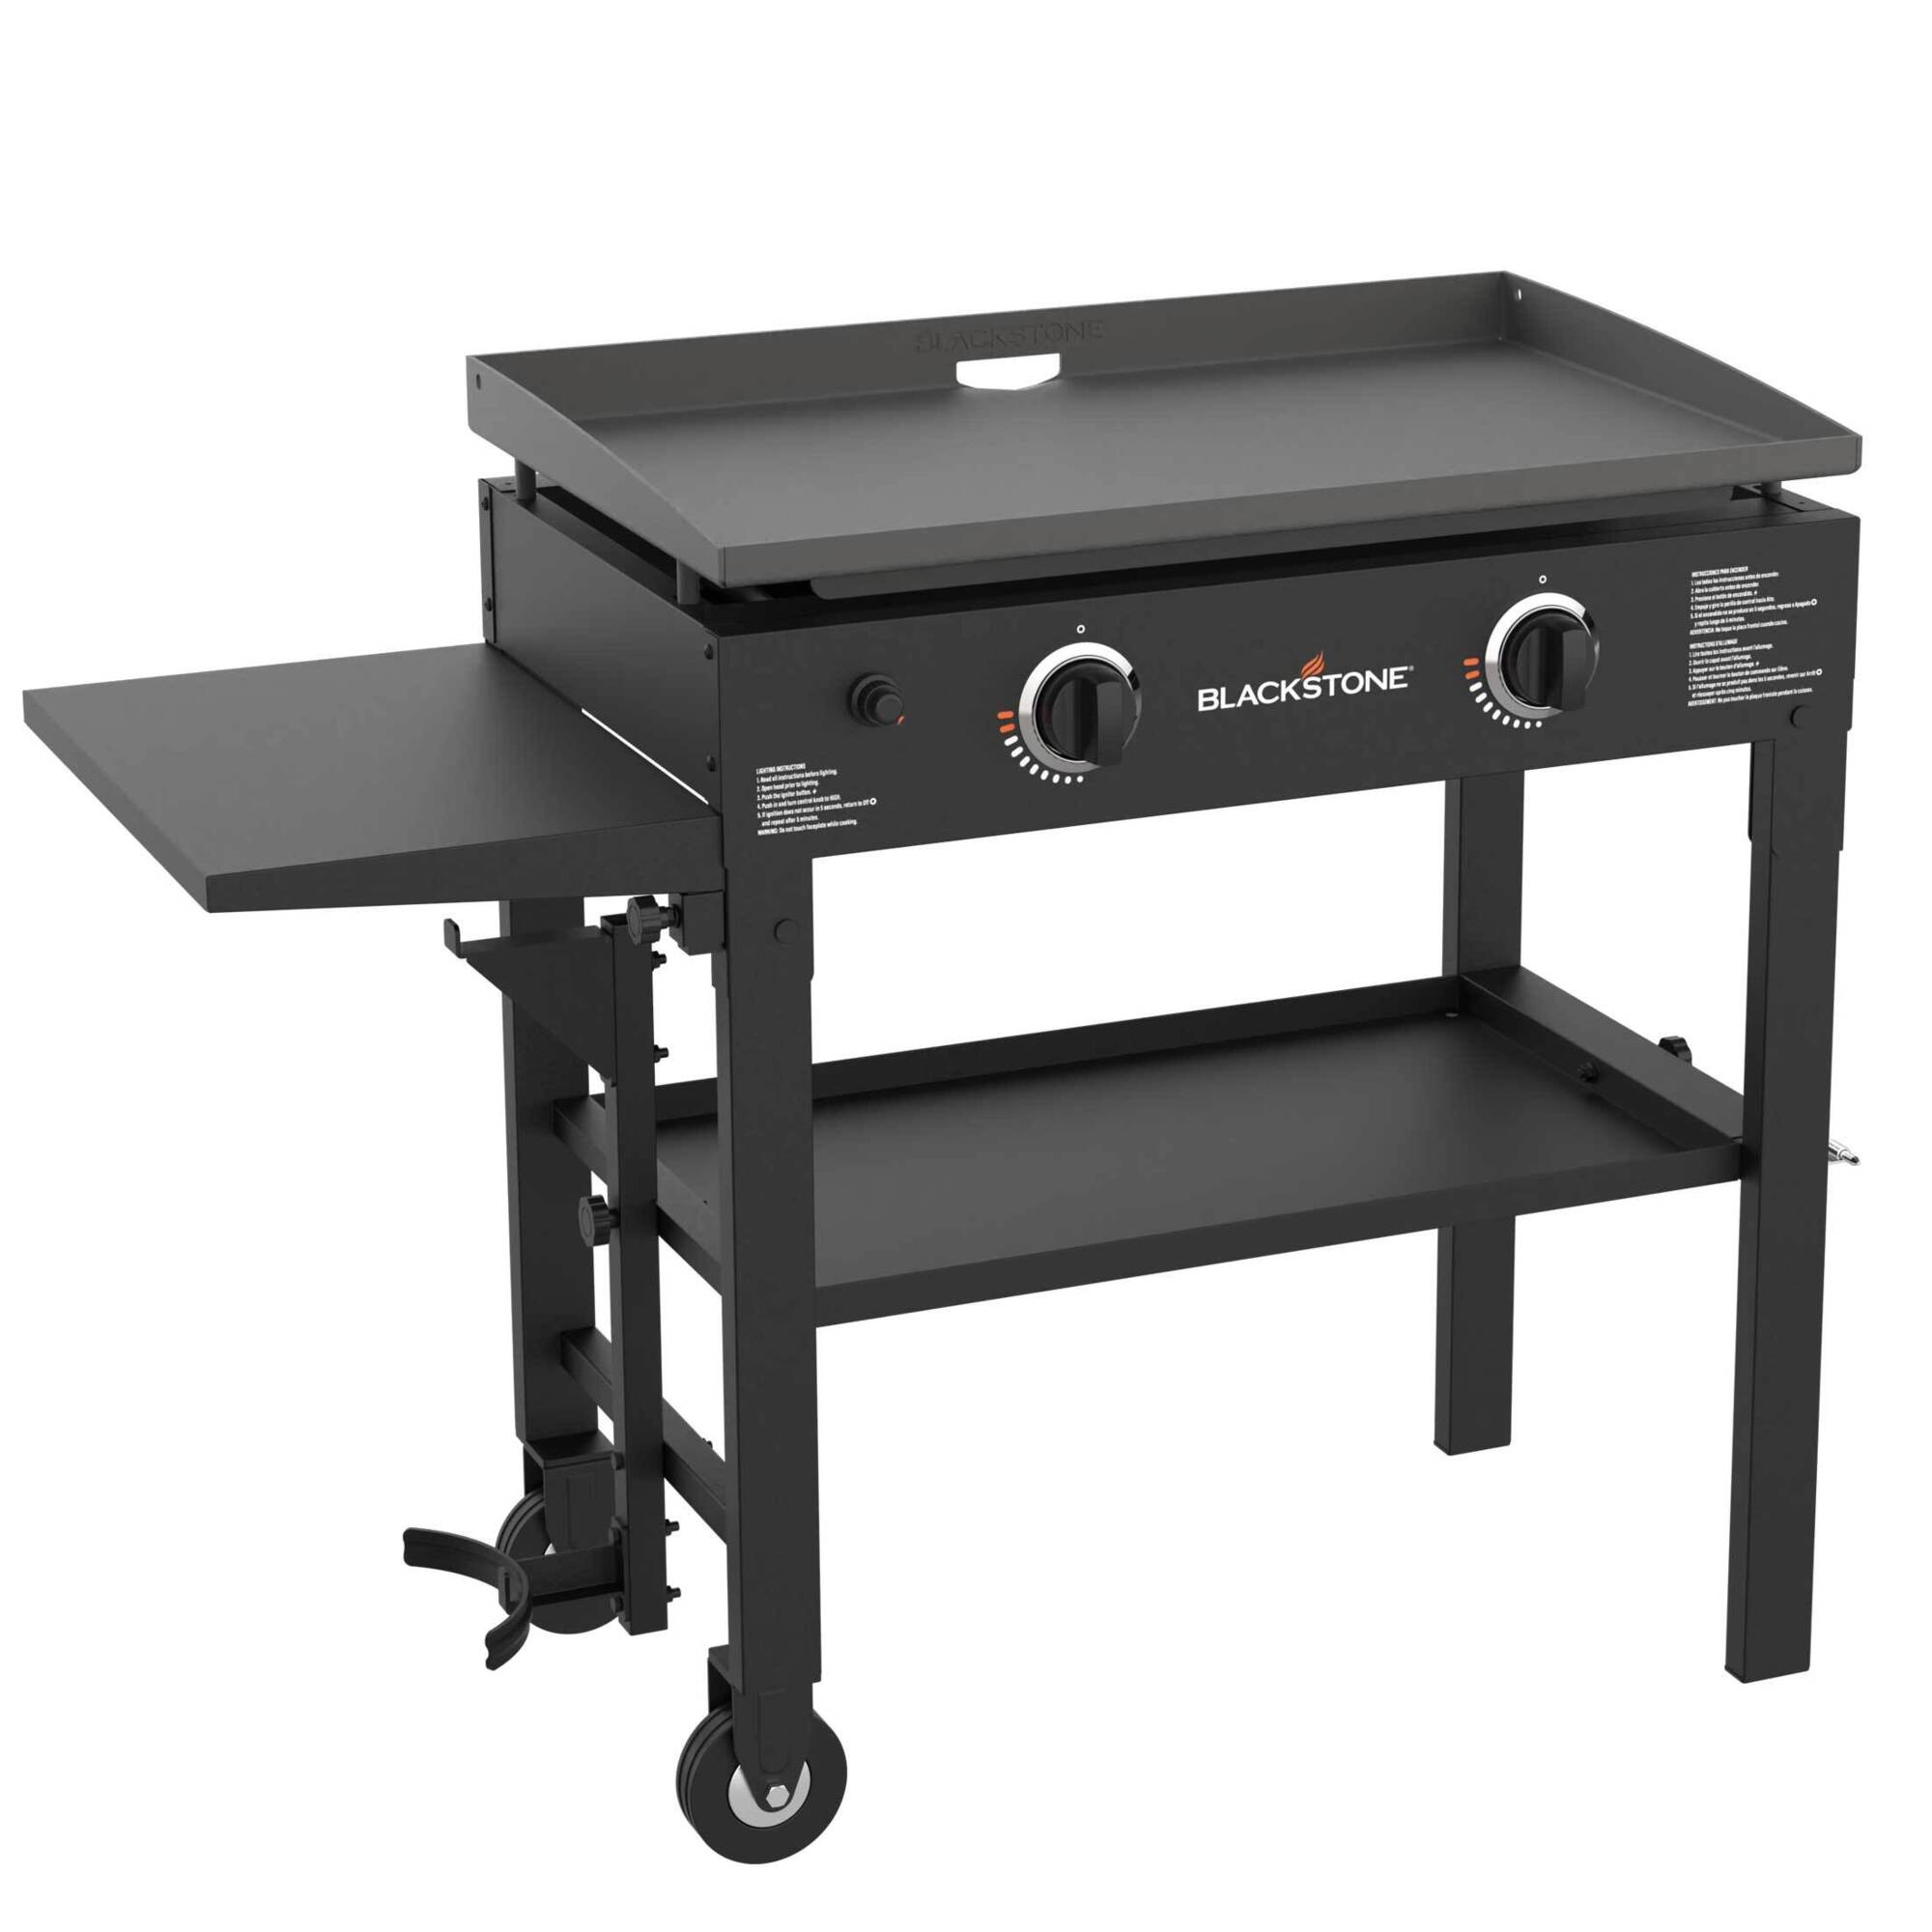 Blackstone, 28Inch griddle cart style no hood, Fuel Type Propane, Model 1517